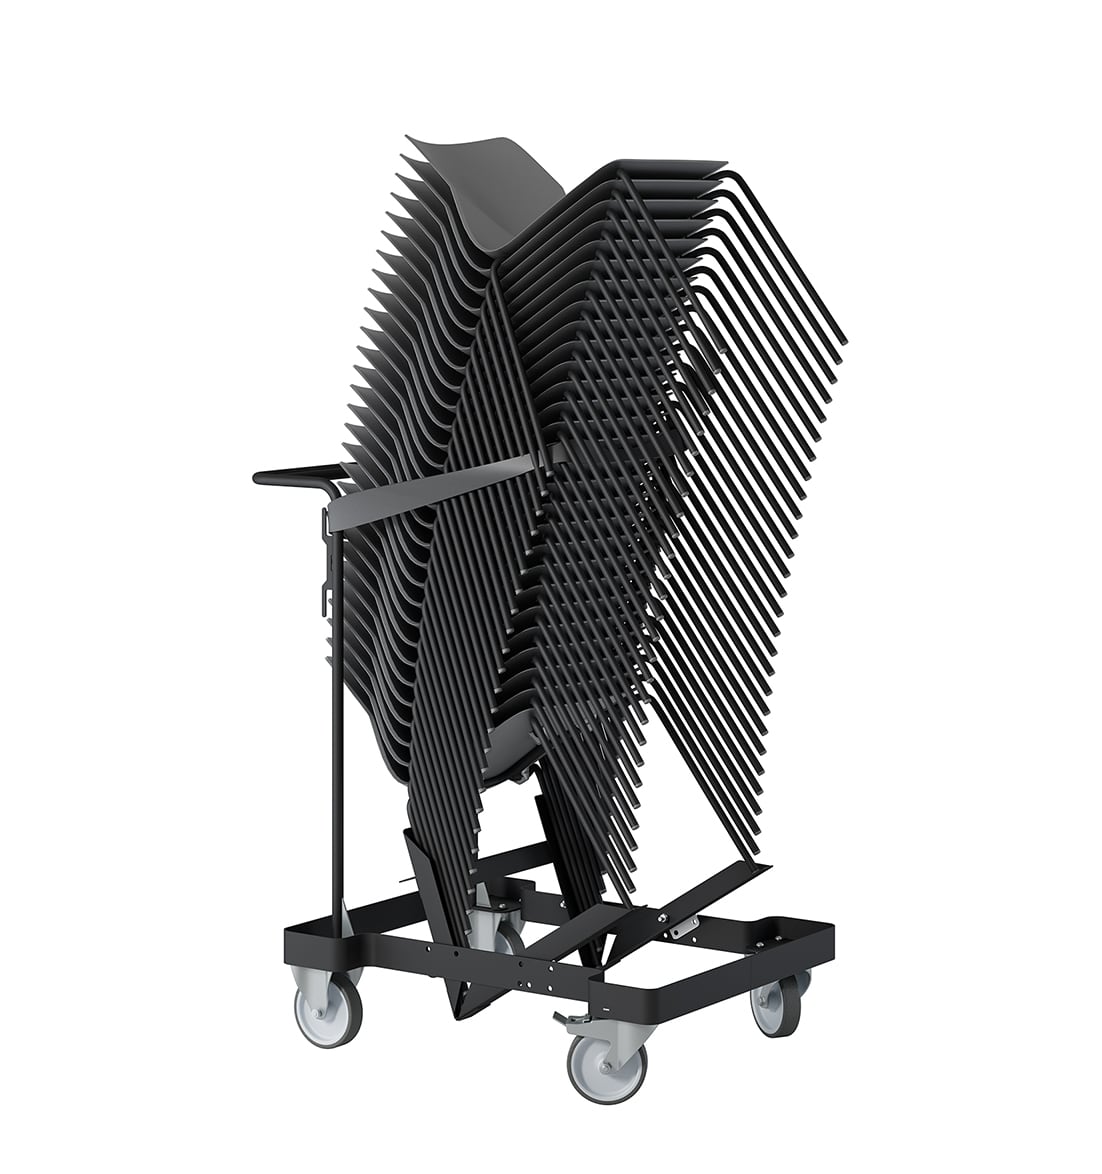 A stack of chairs on a cart with wheels.